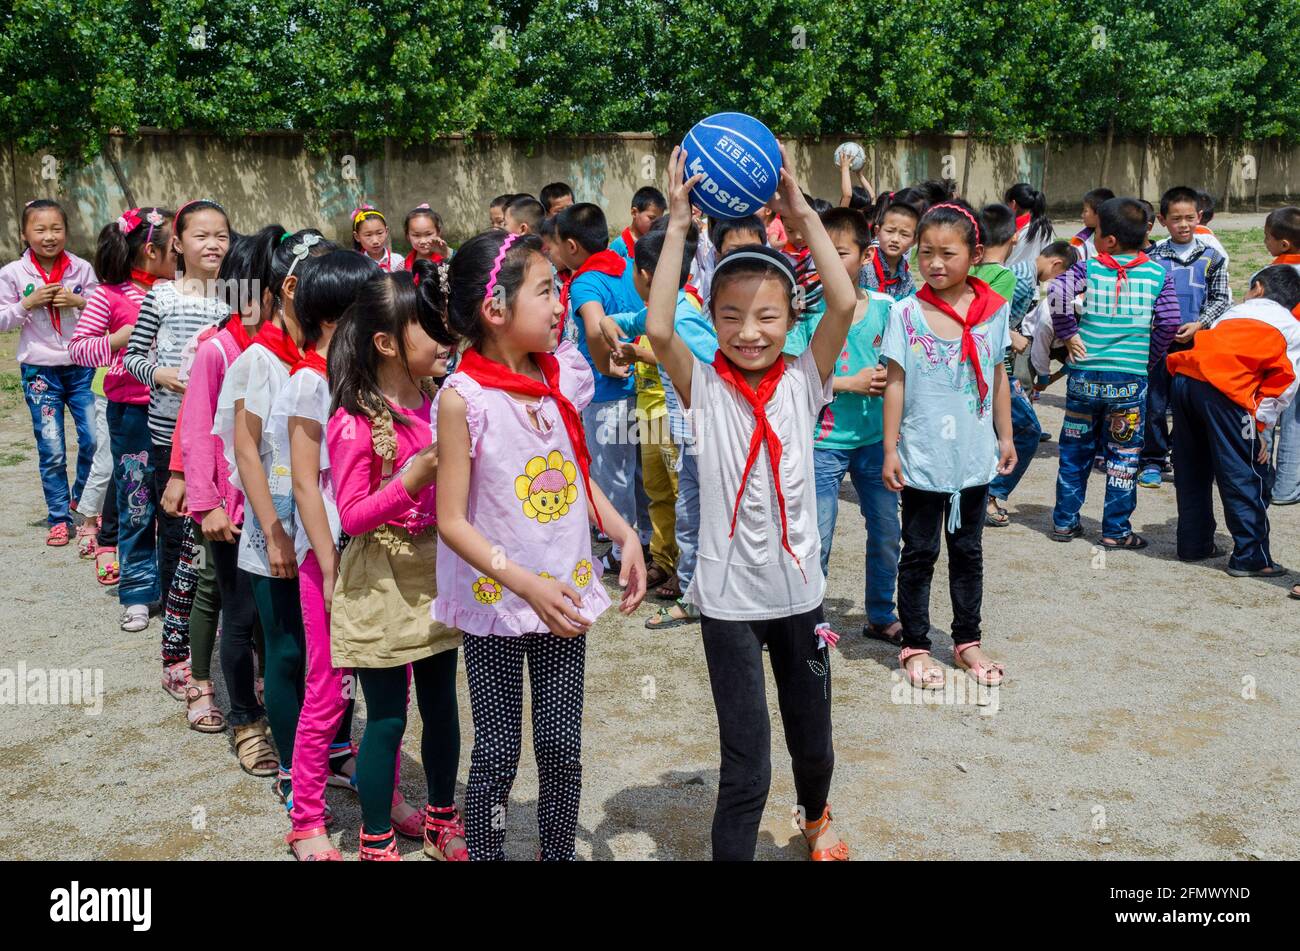 Students in a rural school in Qufu, Shandong, China having a friendly competition with over and under game. Stock Photo